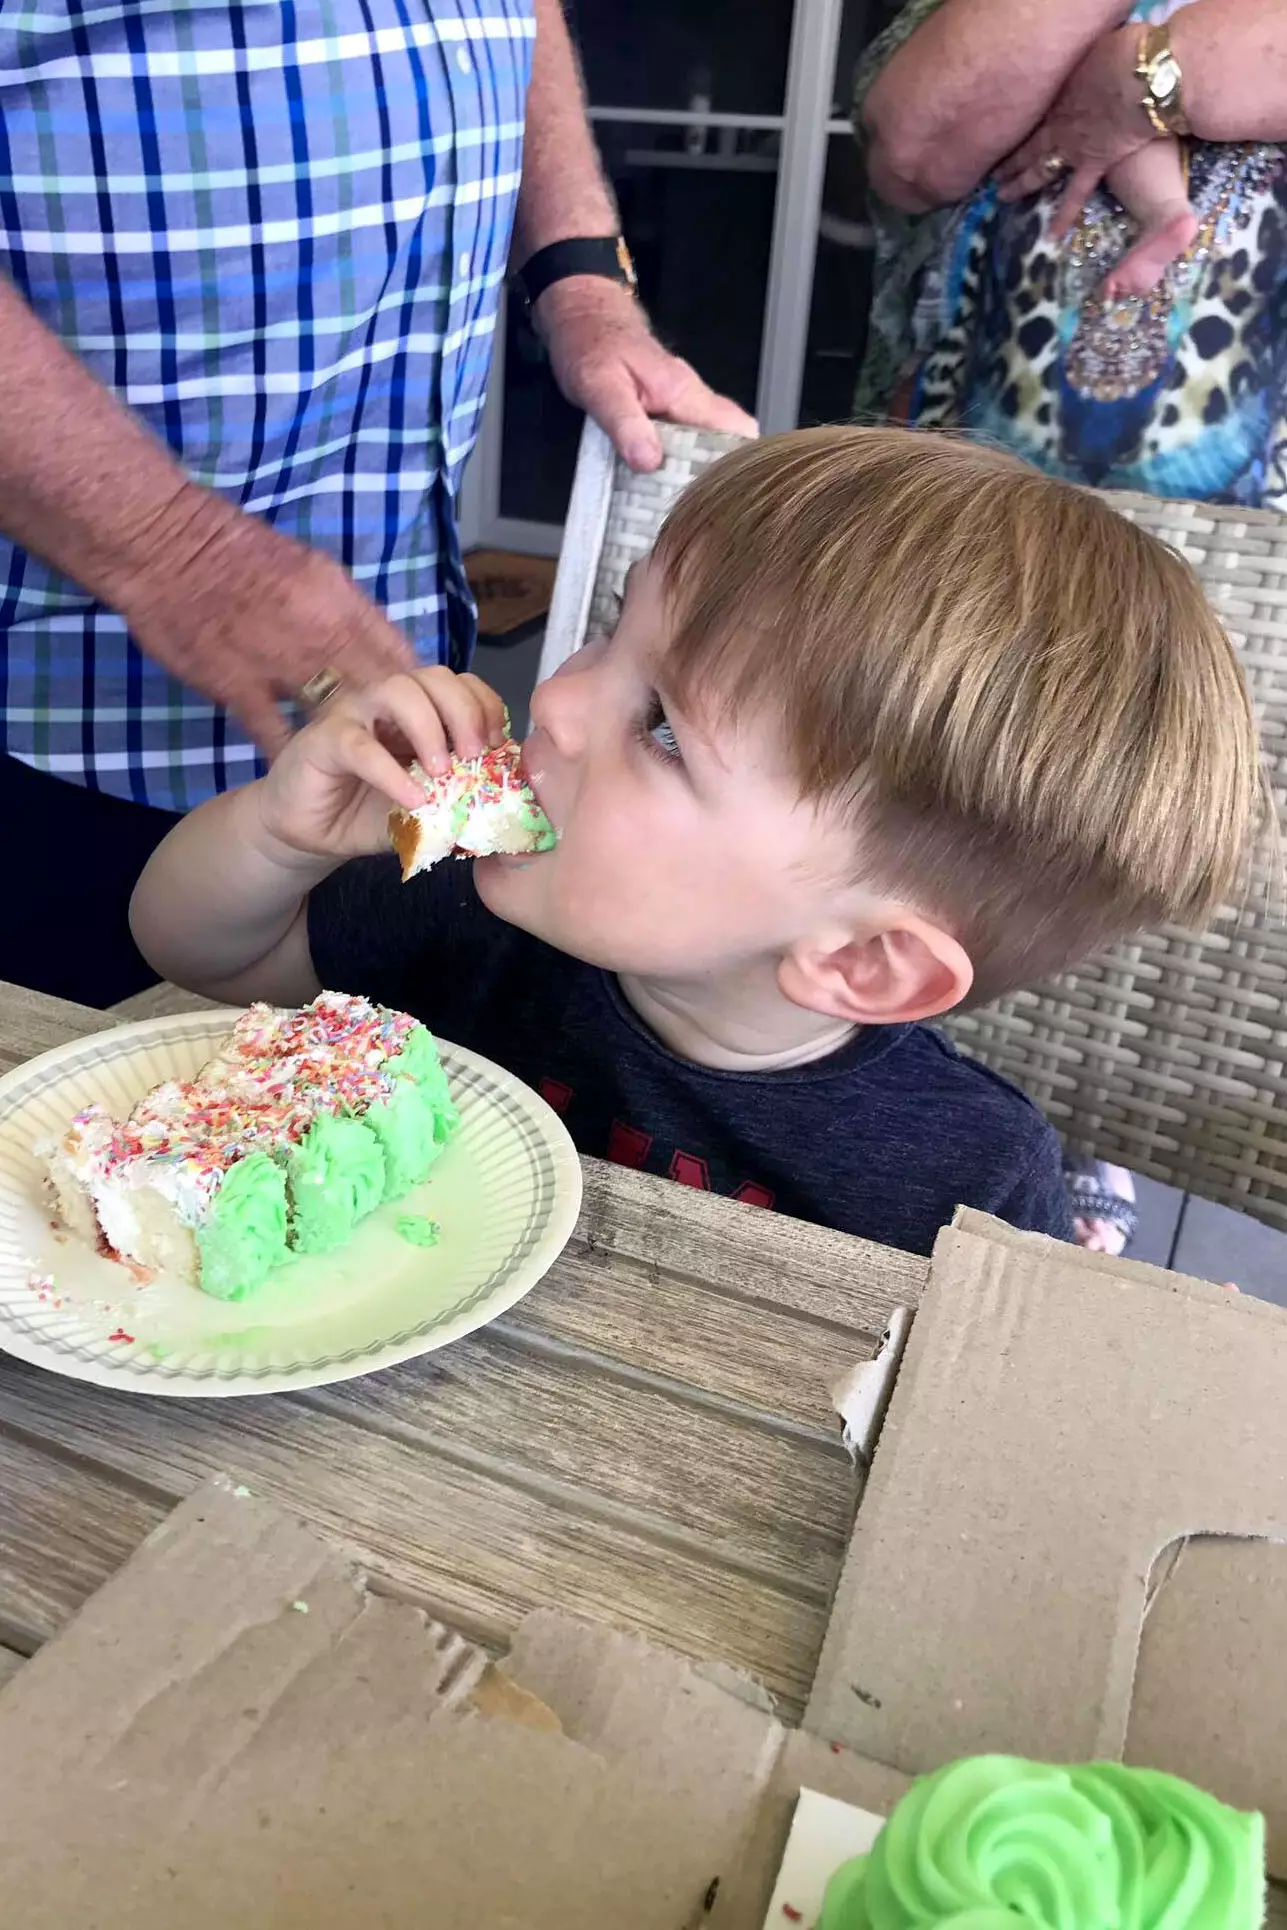 Little Mason enjoying his third birthday cake - if only he'd have known what it looked like hours earlier.